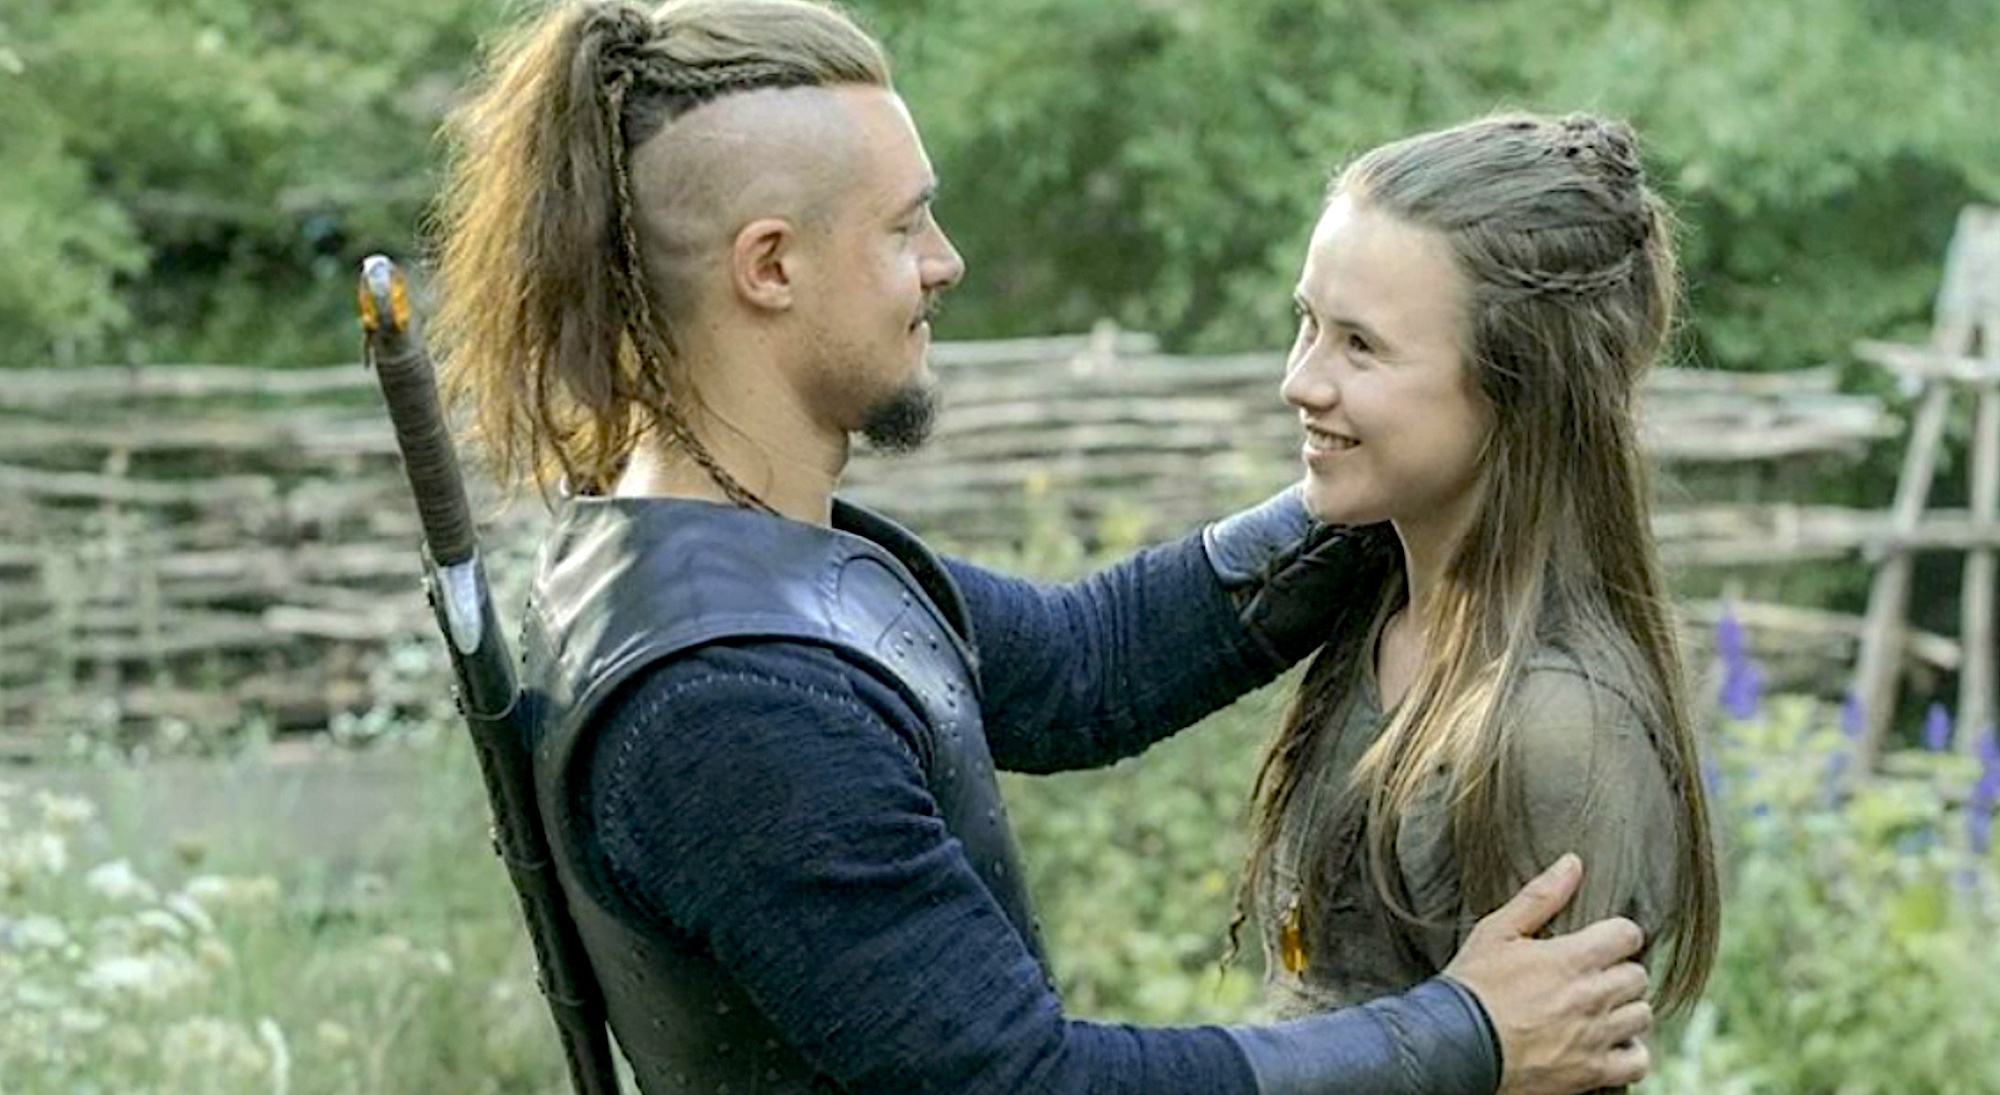 The Last Kingdom Will End With Season 5 On Netflix